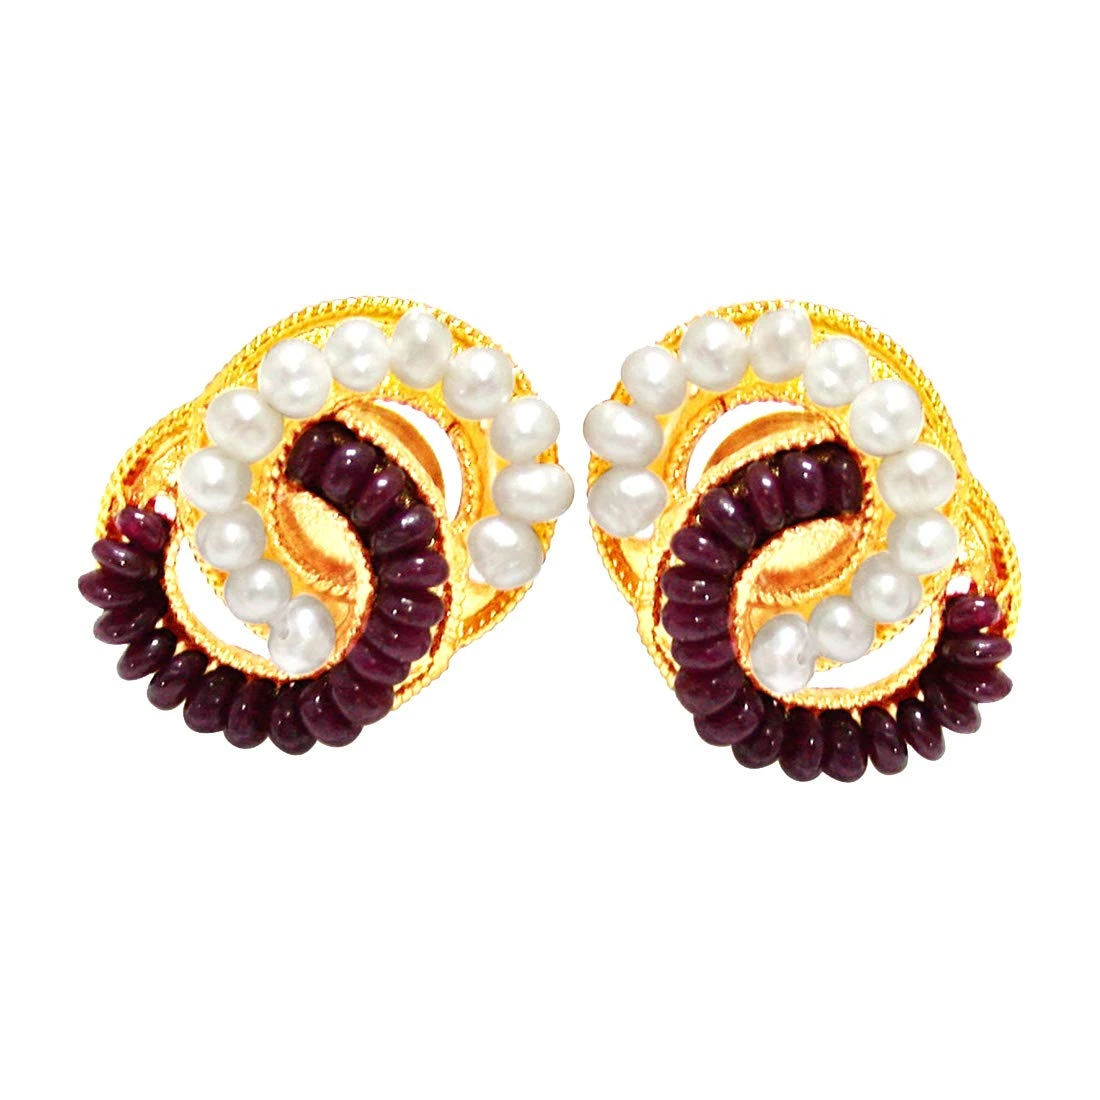 Luminous Surprise - Real Ruby Beads, Freshwater Pearls & Gold Plated Interlocked Earrings for Women (SE76)